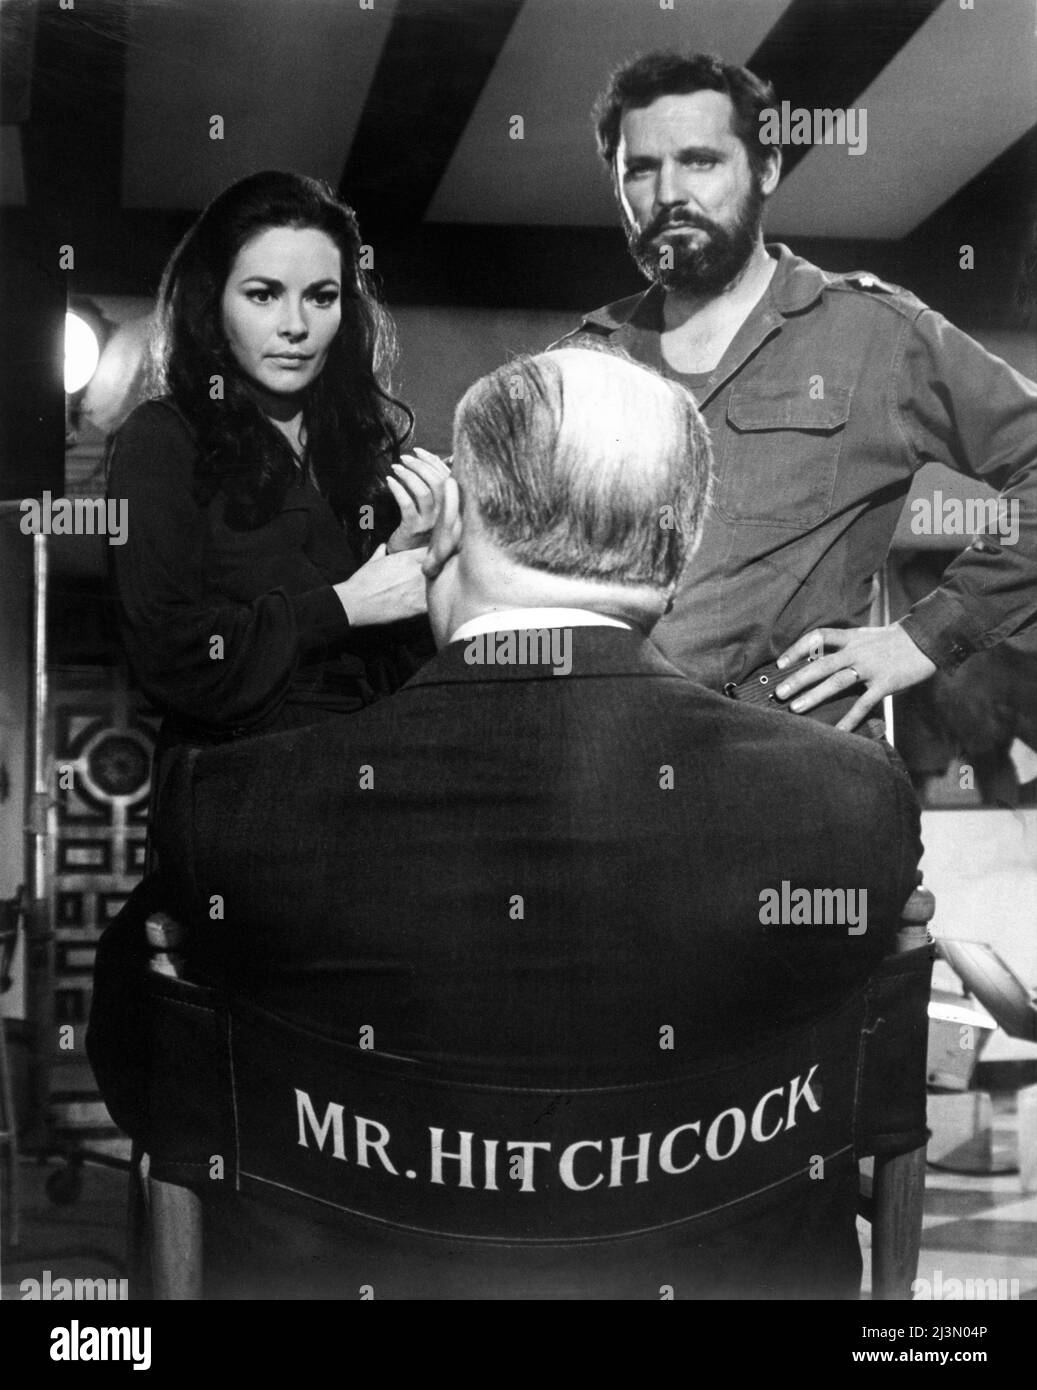 ALFRED HITCHCOCK on set candid with KARIN DOR and JOHN VERNON during filming of TOPAZ 1969 director ALFRED HITCHCOCK novel Leon Uris screenplay Samuel A. Taylor music Maurice Jarre costume design Edith Head Alfred J. Hitchcock Productions / Universal Pictures Stock Photo